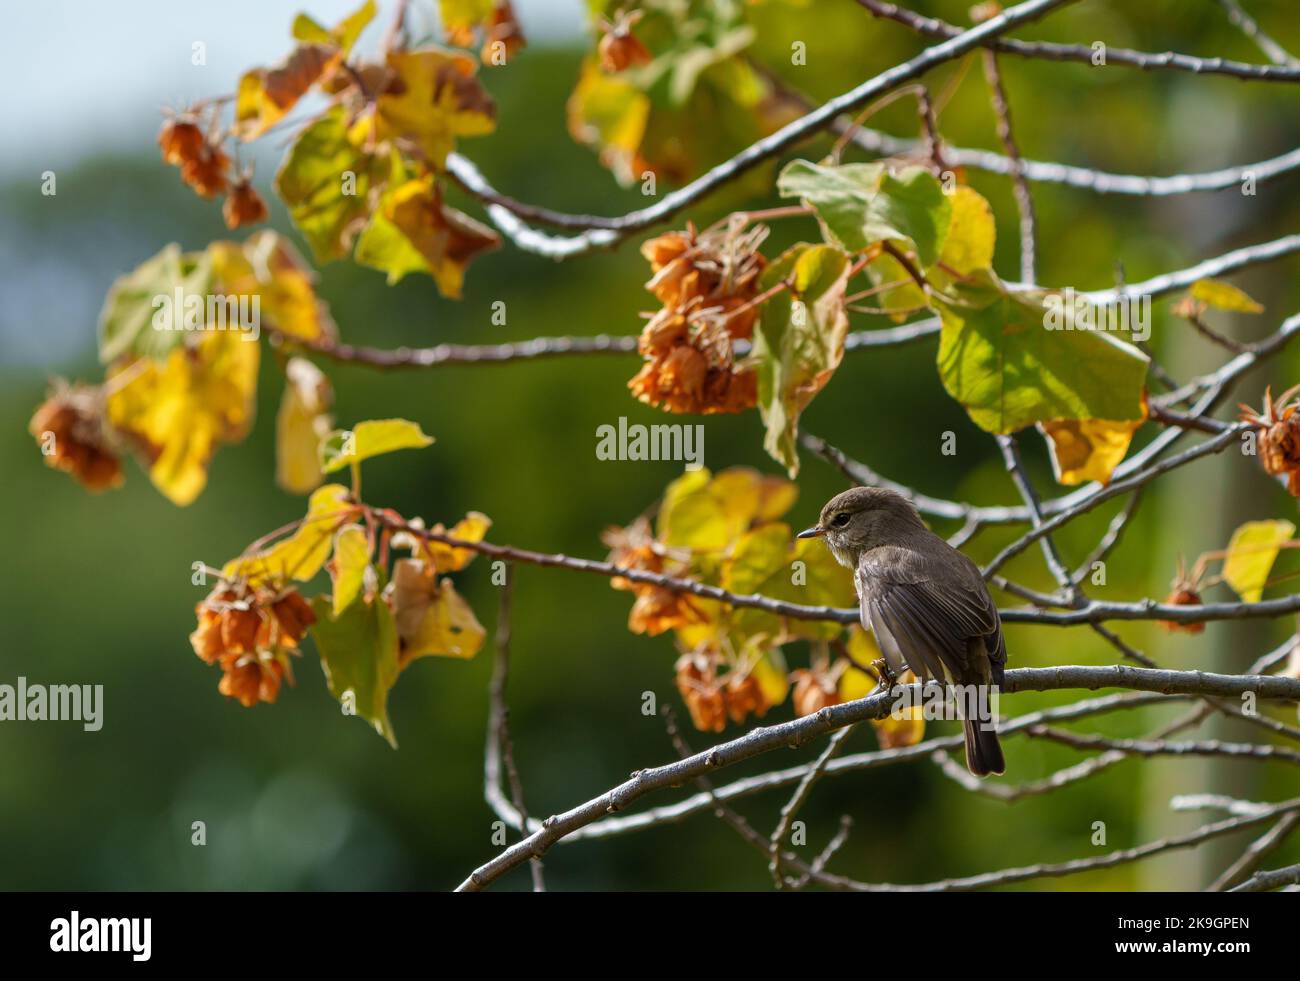 African dusky flycatcher (Muscicapa adusta) perchased on a tree branch. Cape Town, Western Cape. South Africa Stock Photo